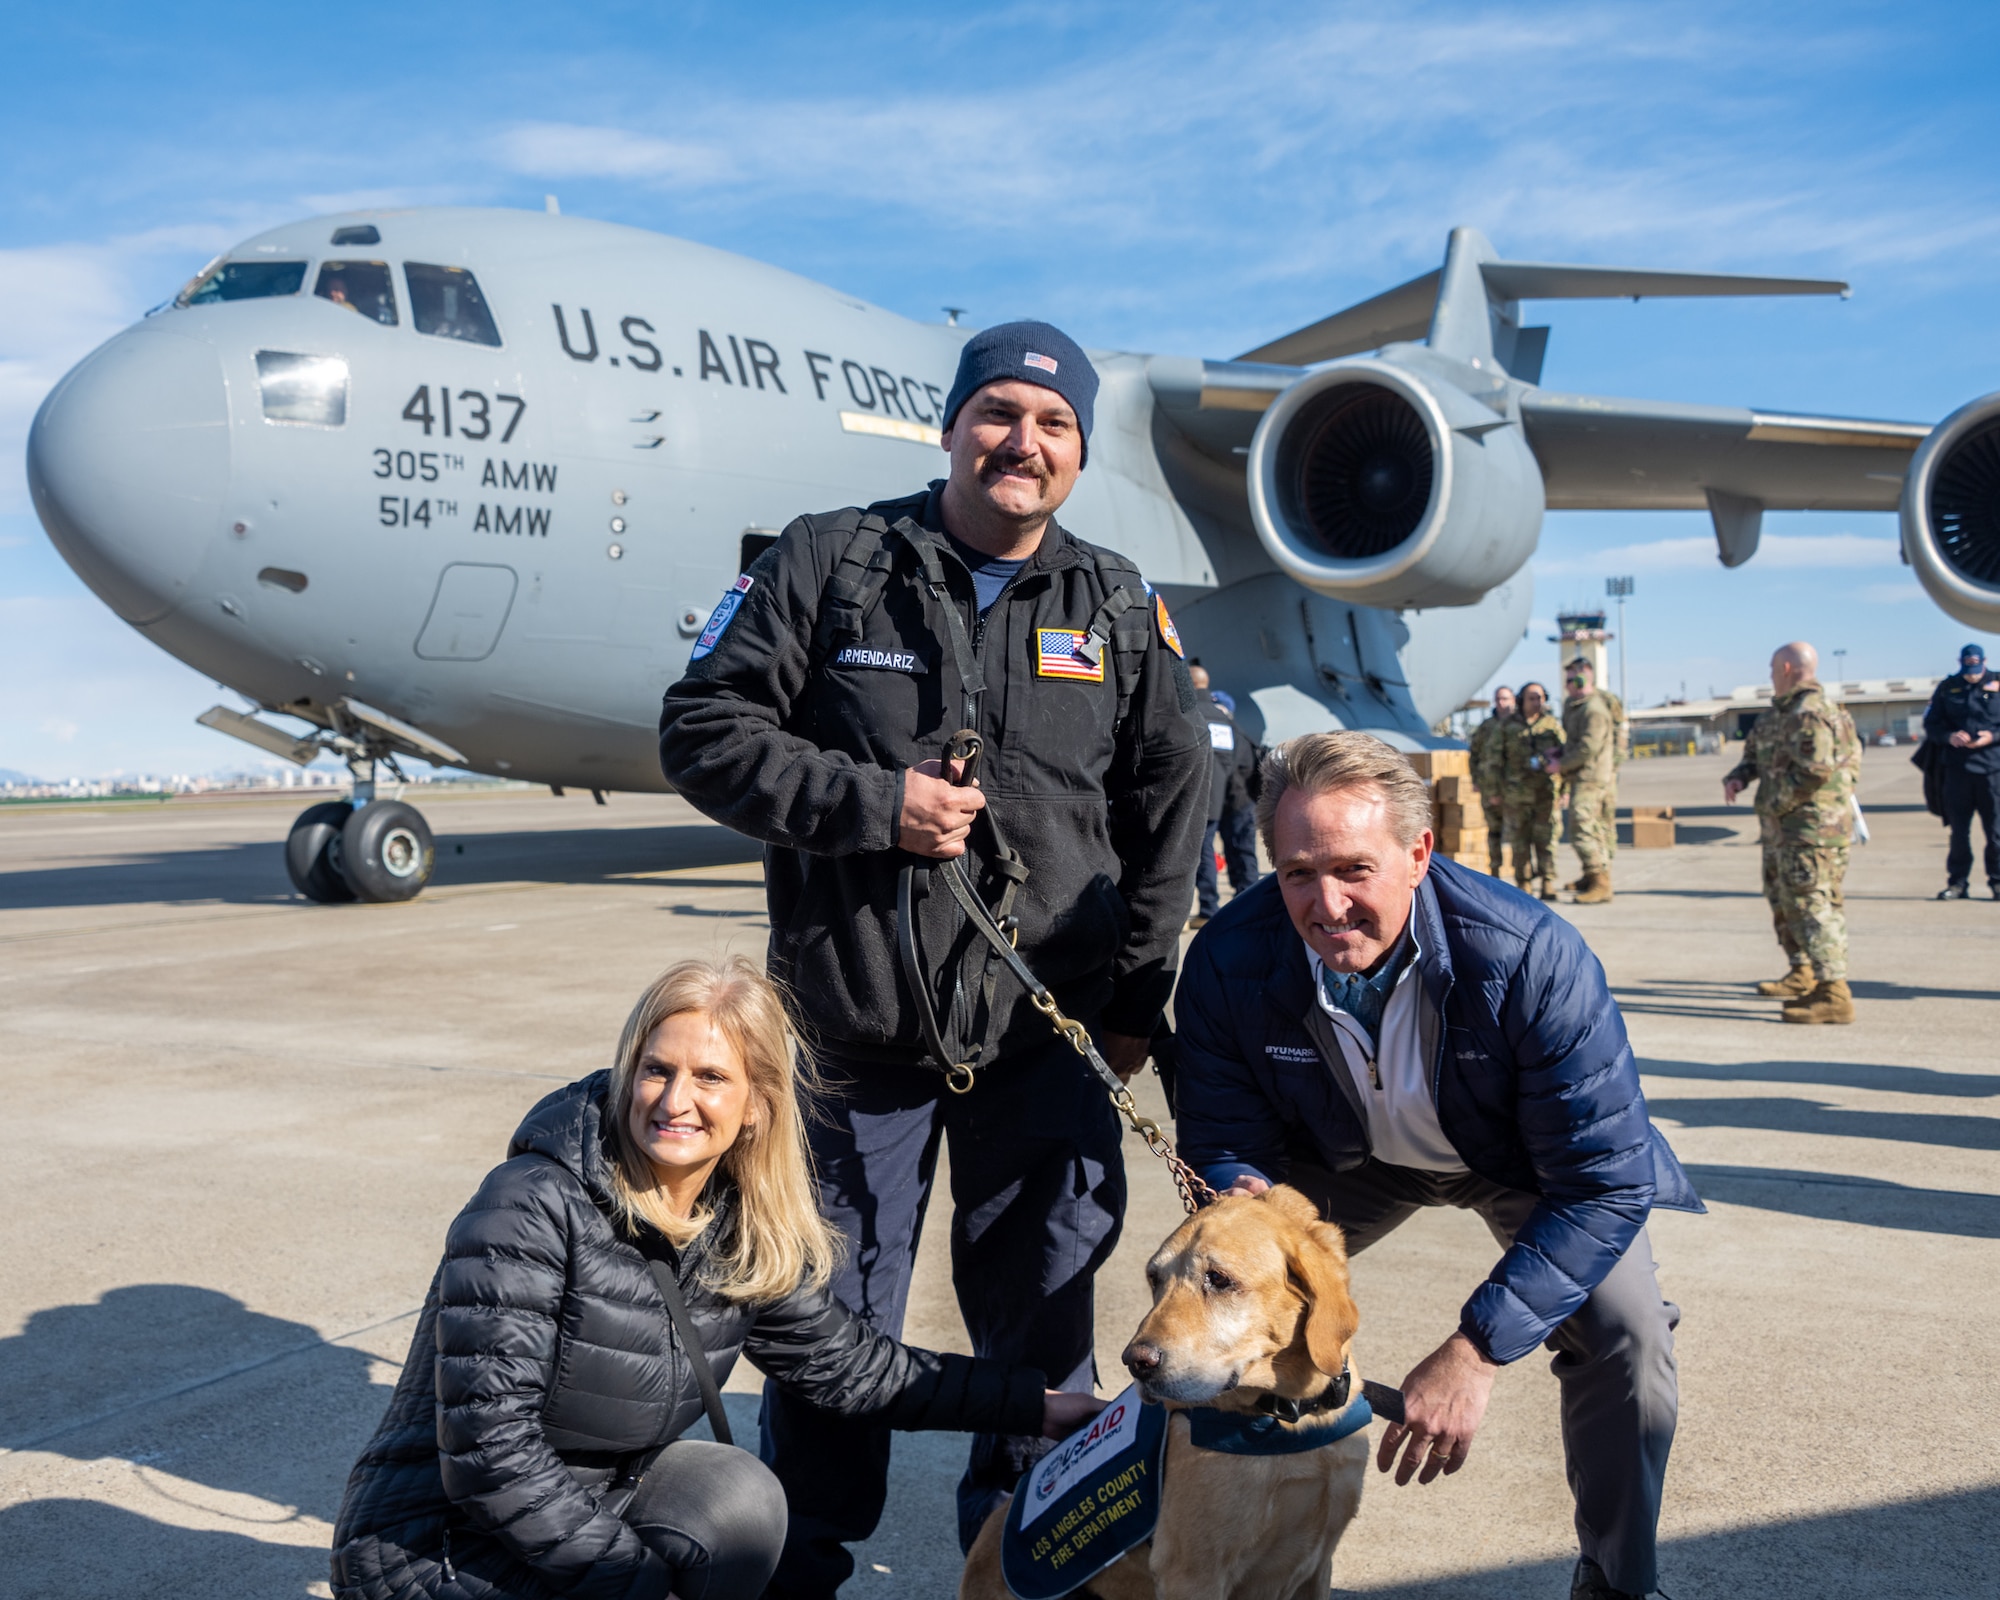 U.S. Ambassador Jeffry Flake, U.S. Ambassador to Türkiye, right, and Cheryl Flake, his wife, left, pose for a photo with a member of the United States Agency for International Development’s Disaster Assistance Response Team and his search and rescue dog after they arrived at Incirlik Air Base, Türkiye, Feb 8, 2023. Ambassador Flake visited Incirlik AB to greet members of the USAID team, following a series of earthquakes that struck central-southern Türkiye on Feb 6, 2023. As Ambassador to Türkiye, Flake holds the highest civilian position as The Chief of Mission, and impacts the communication and resources of U.S. personnel, advancing the U.S. foreign policy goals. As a fellow NATO ally, the U.S. Government mobilized personnel to assist in Türkiye in their response efforts. (U.S. Air Force photo by Senior Airman David D. McLoney)